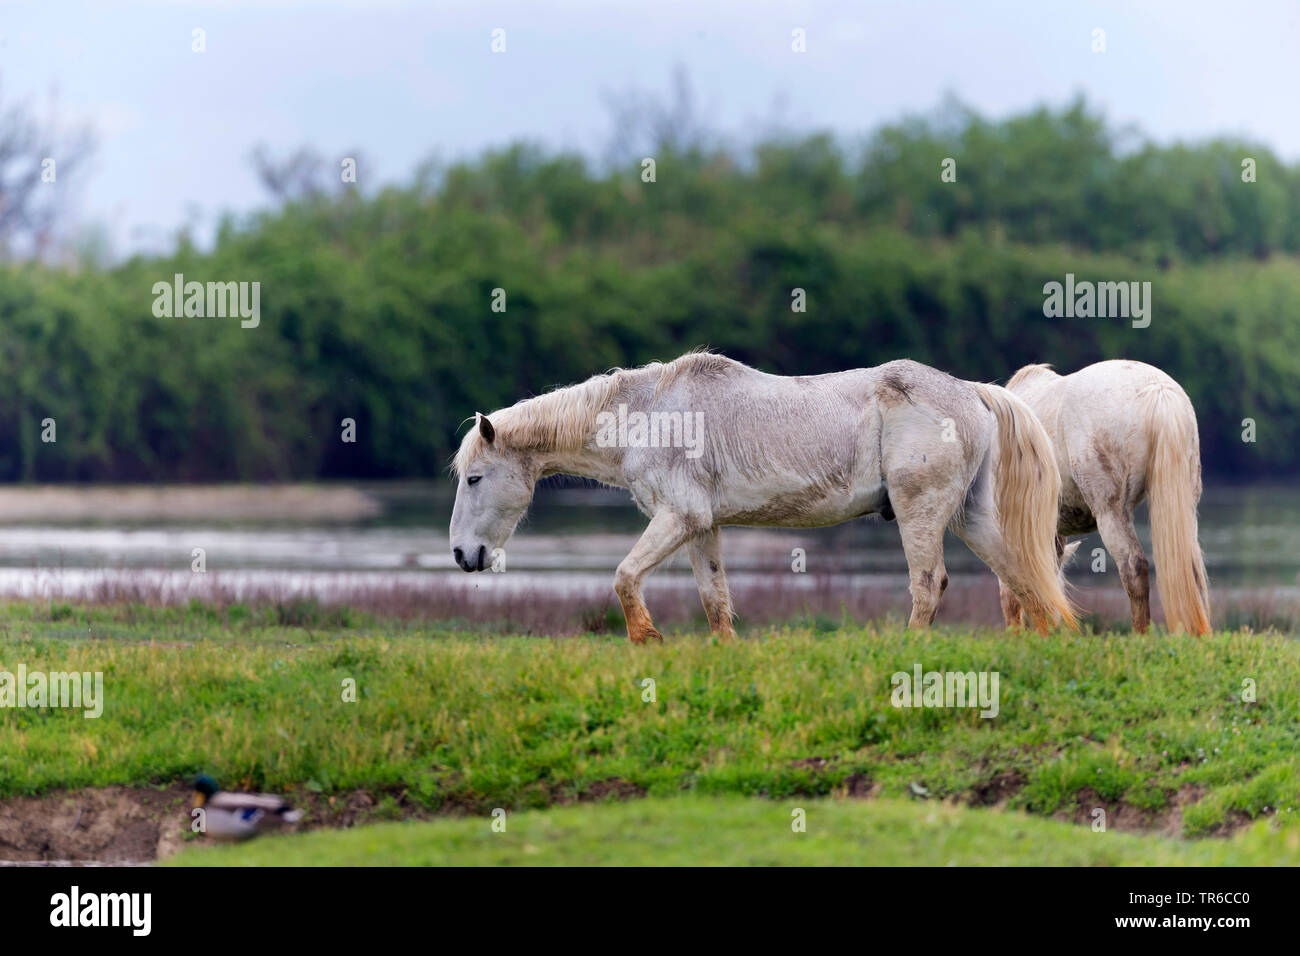 Camargue horse (Equus przewalskii f. caballus), two Camargue horses grazing in the wetland, Spain Stock Photo